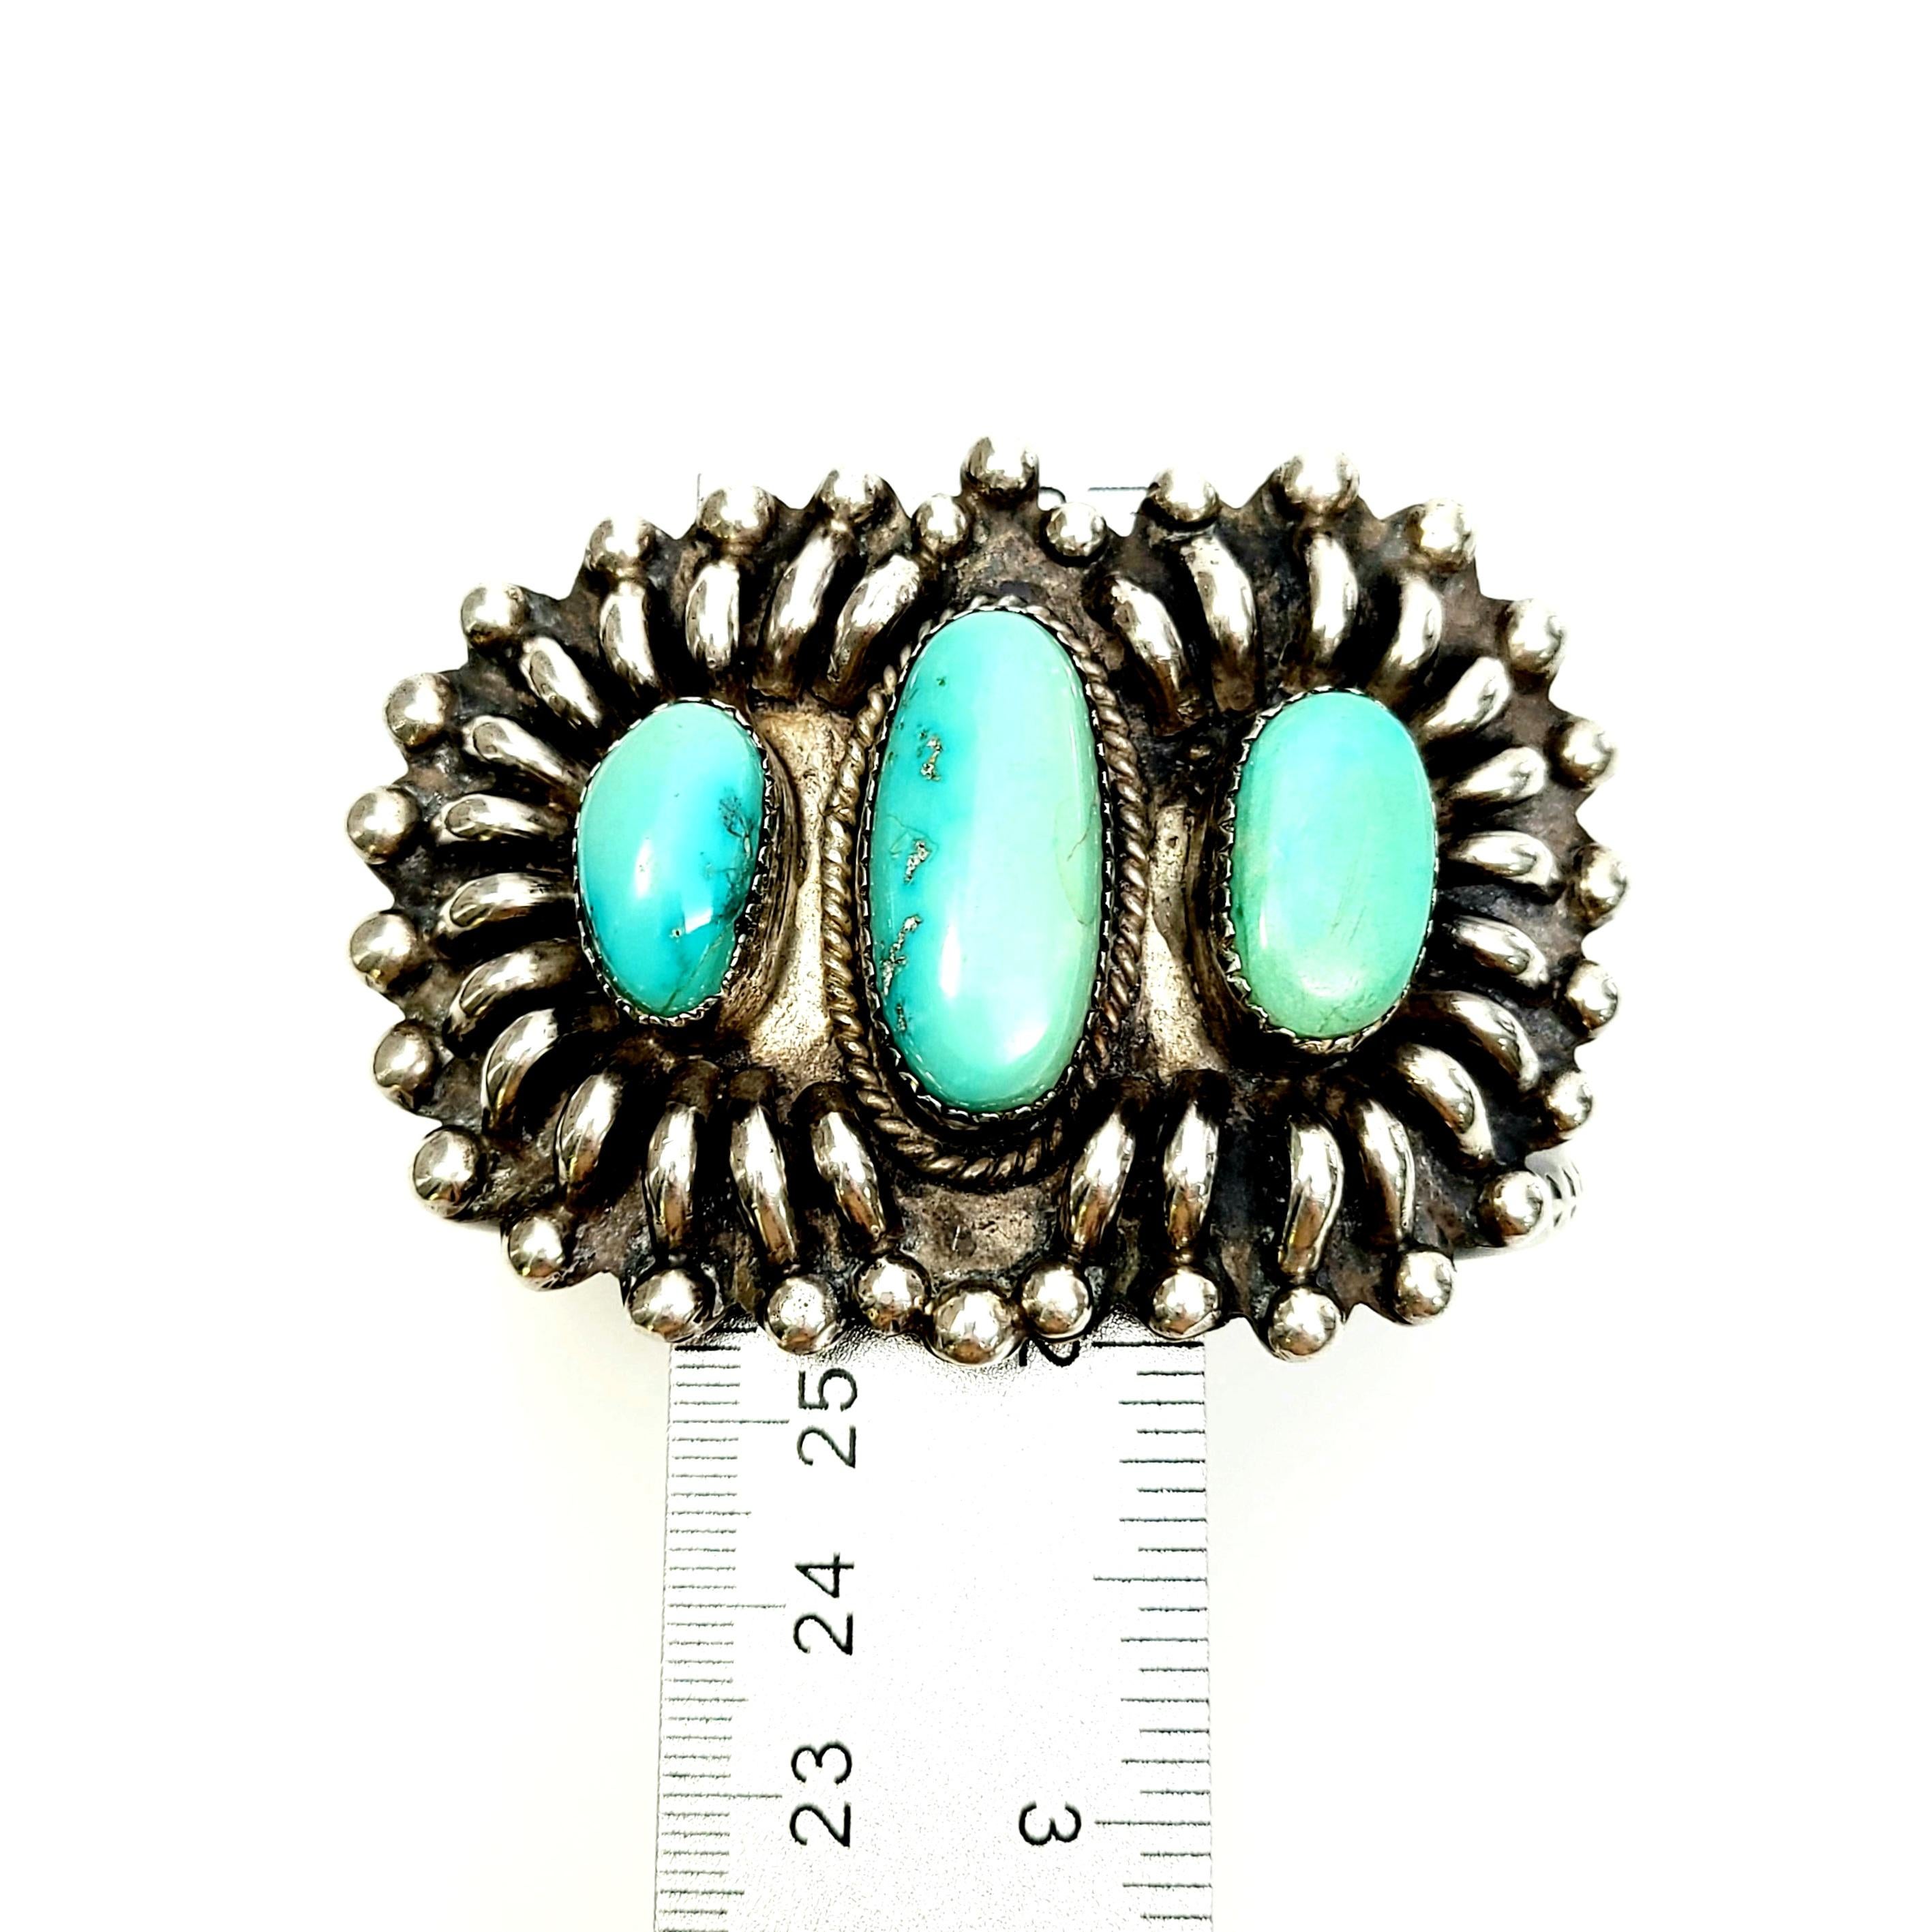 Native American Daisy M Tsosie Large Sterling Silver Turquoise Cuff Bracelet 9